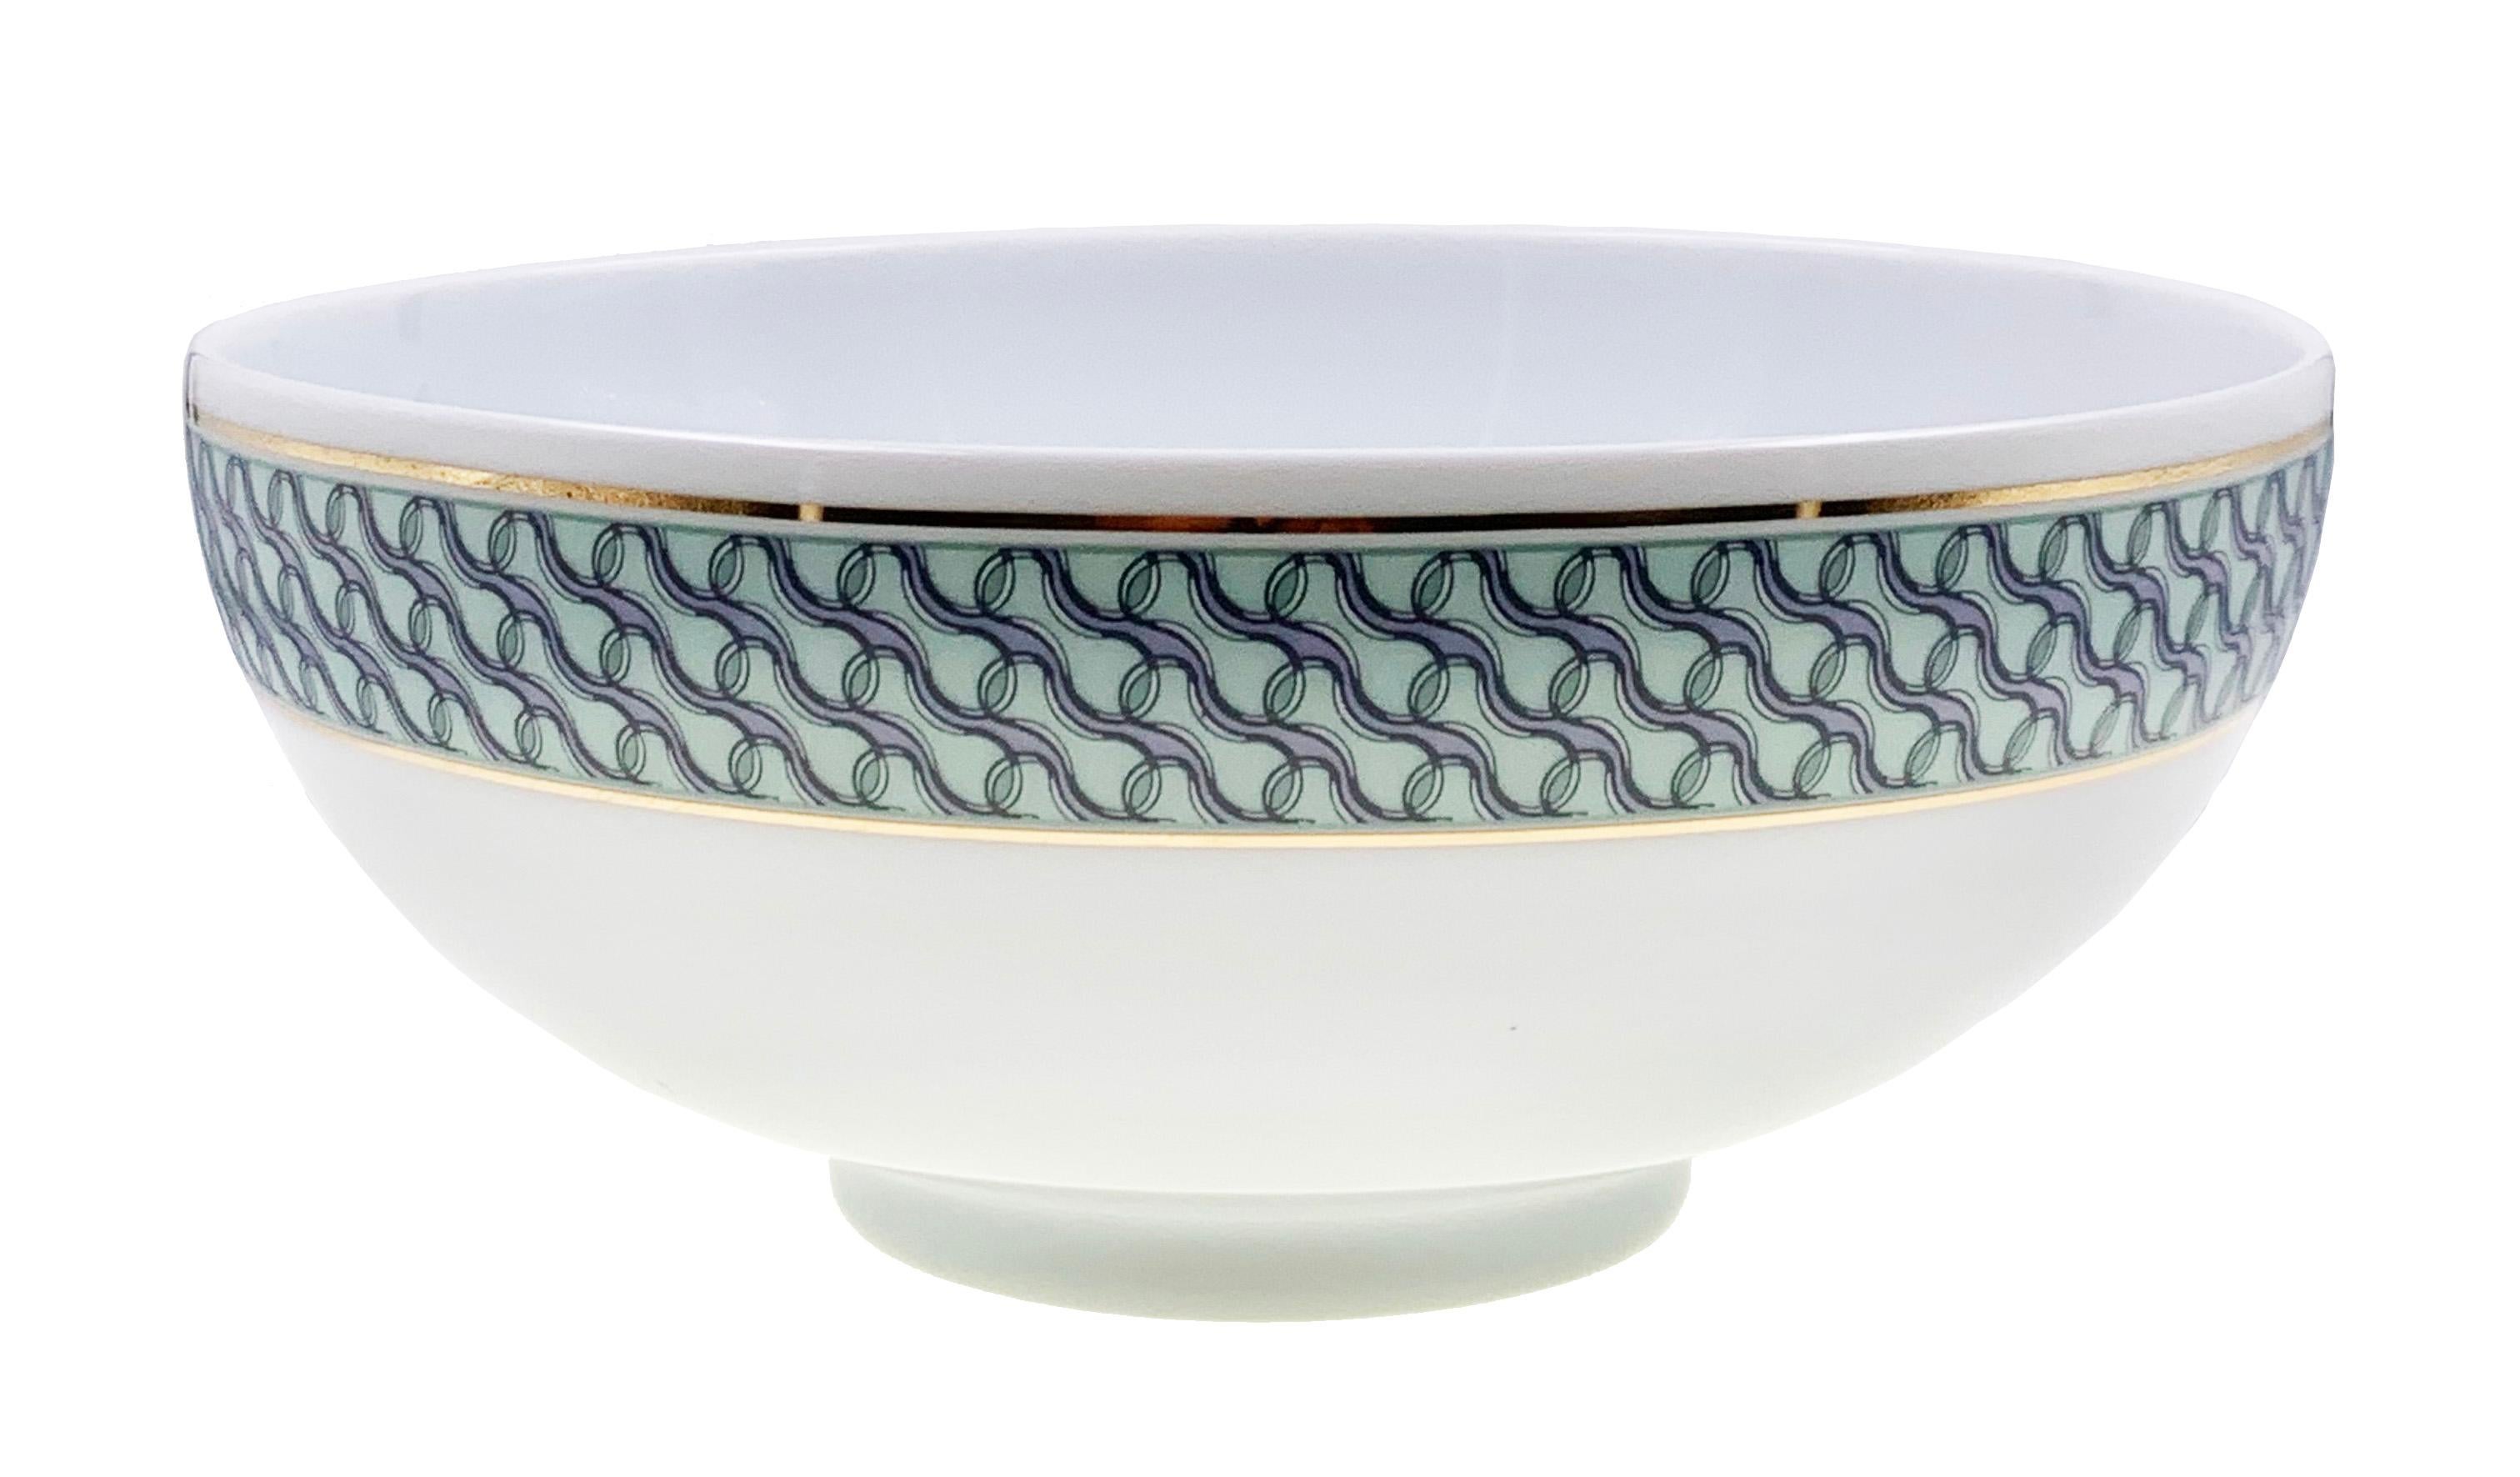 Larger quantities available upon request, with 8 weeks production time.

Description: Set of 2 large noodle salad bowl (2 pieces)
Color: Sage green
Size: 20Ø x 8.5H cm, 1300ml
Material: Porcelain and gold
Collection: Mid Century Rhythm